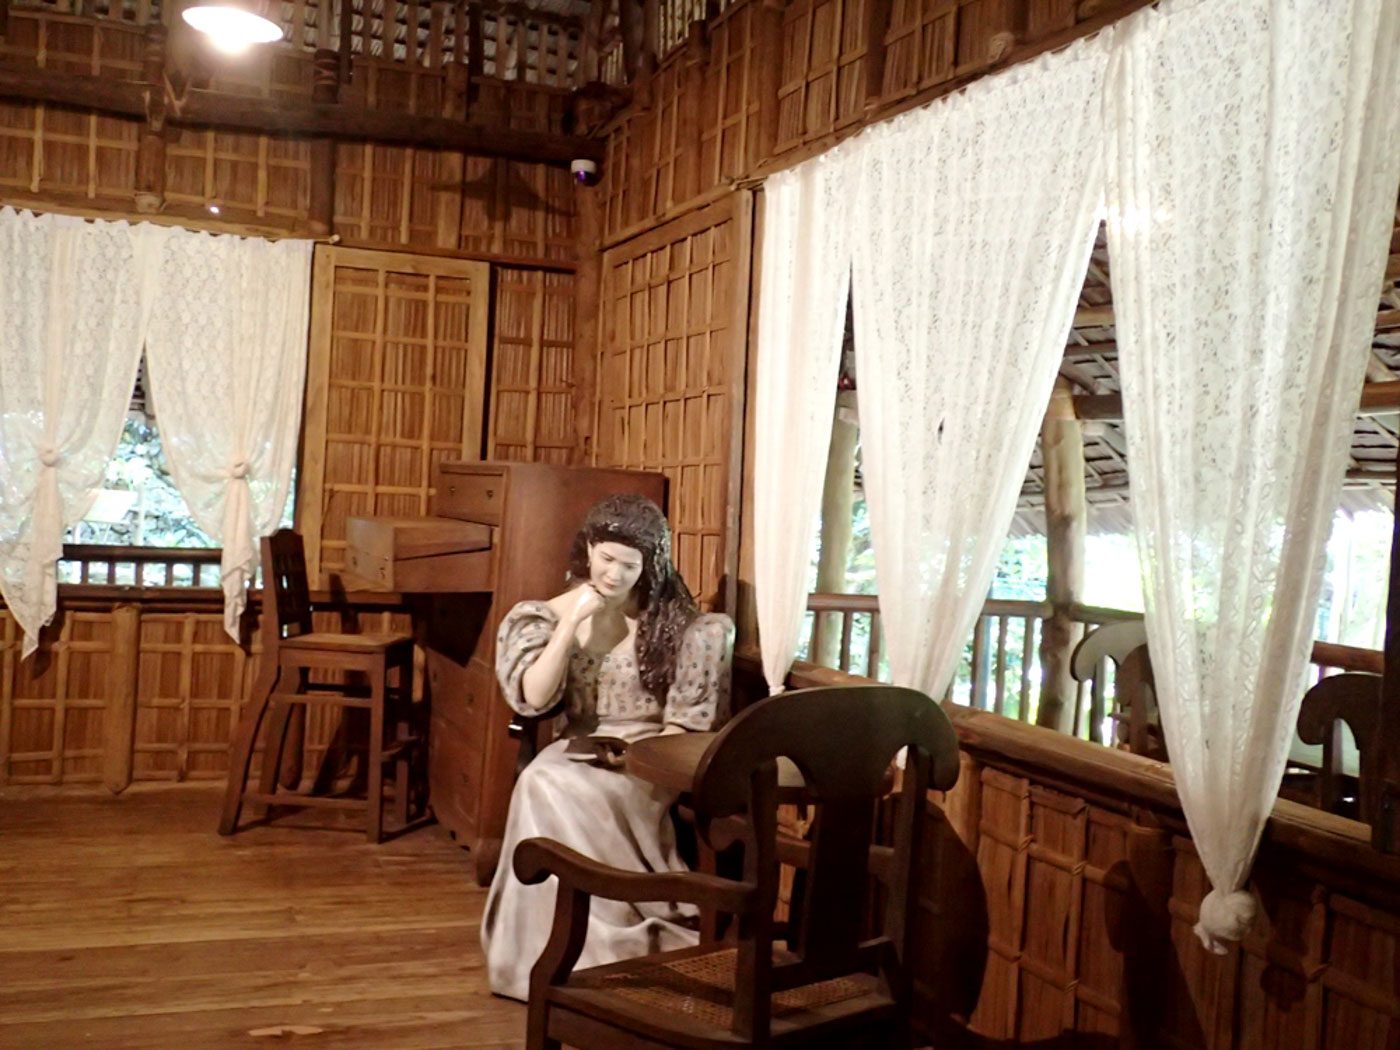 HOME SWEET HOME. Inside Casa Residencia, Rizal's main home. Here he lived with his mother, sisters, and some relatives, and then later with his partner Josephine Bracken. Bracken would look out the window, anticipating Rizal's return.  